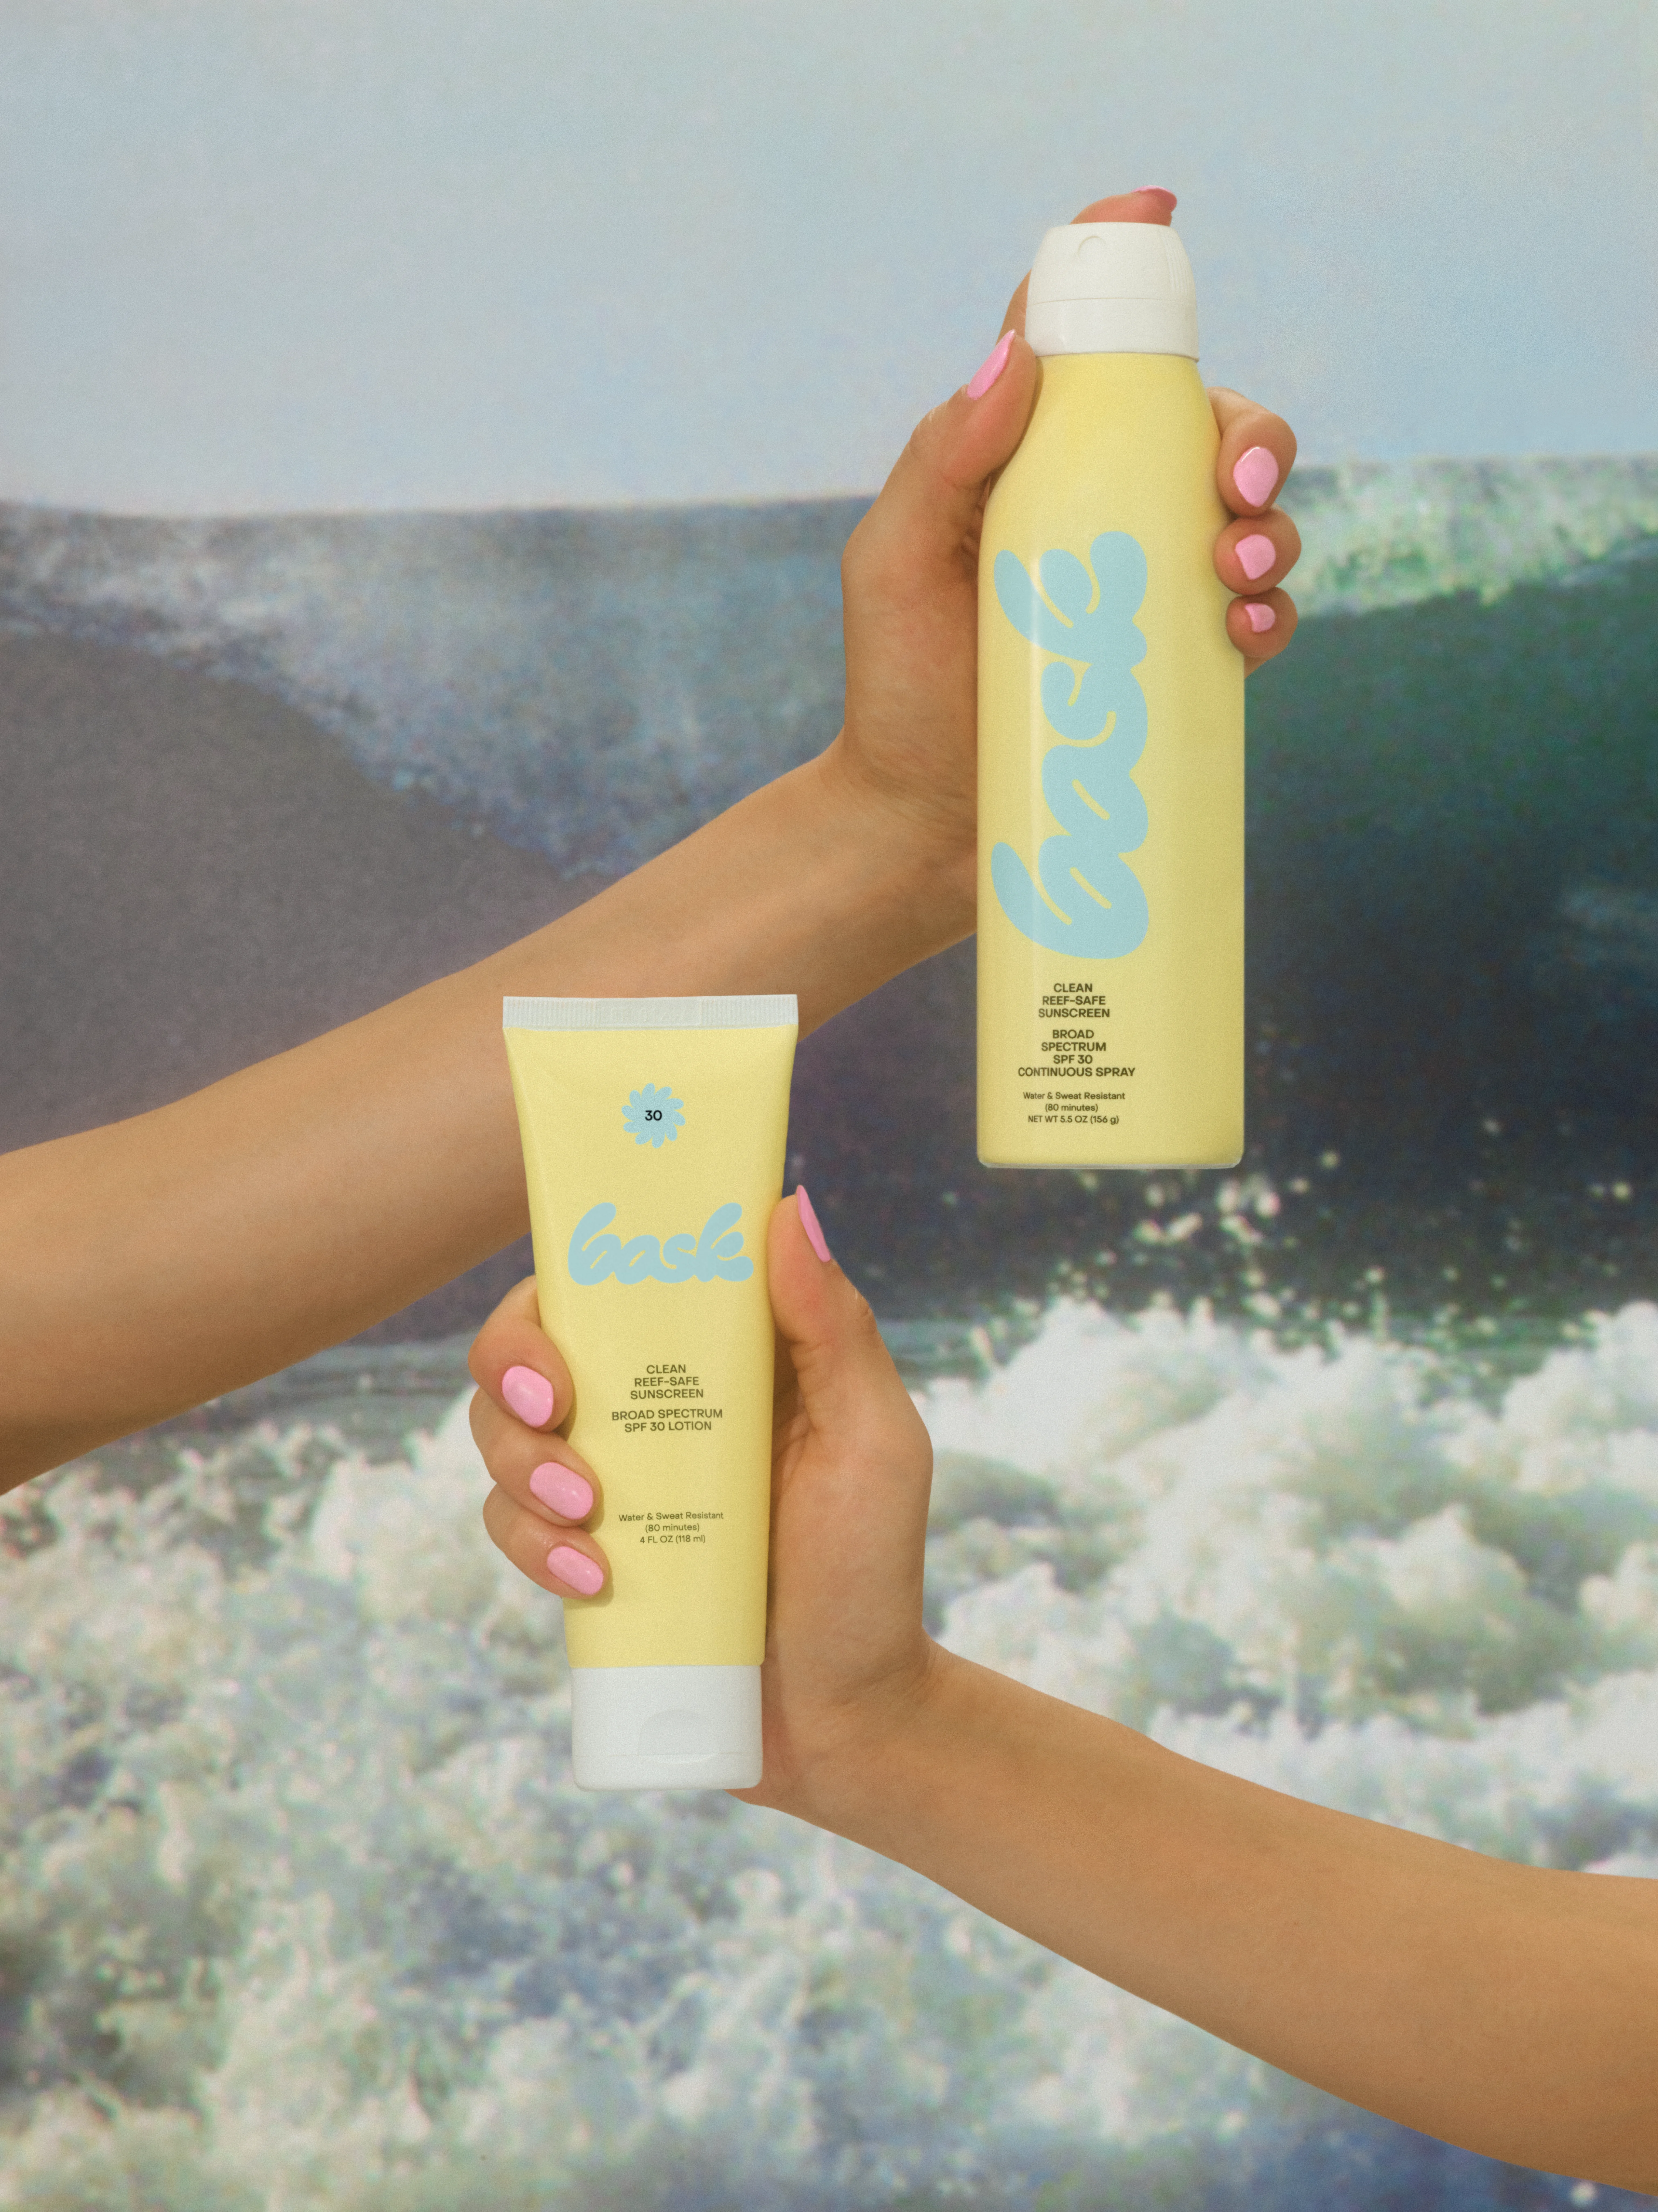 Bask Yellow Lotion Tube and Yellow Continuous Spray Bottle held up against an Ocean Wave - Art Direction by RoAndCo